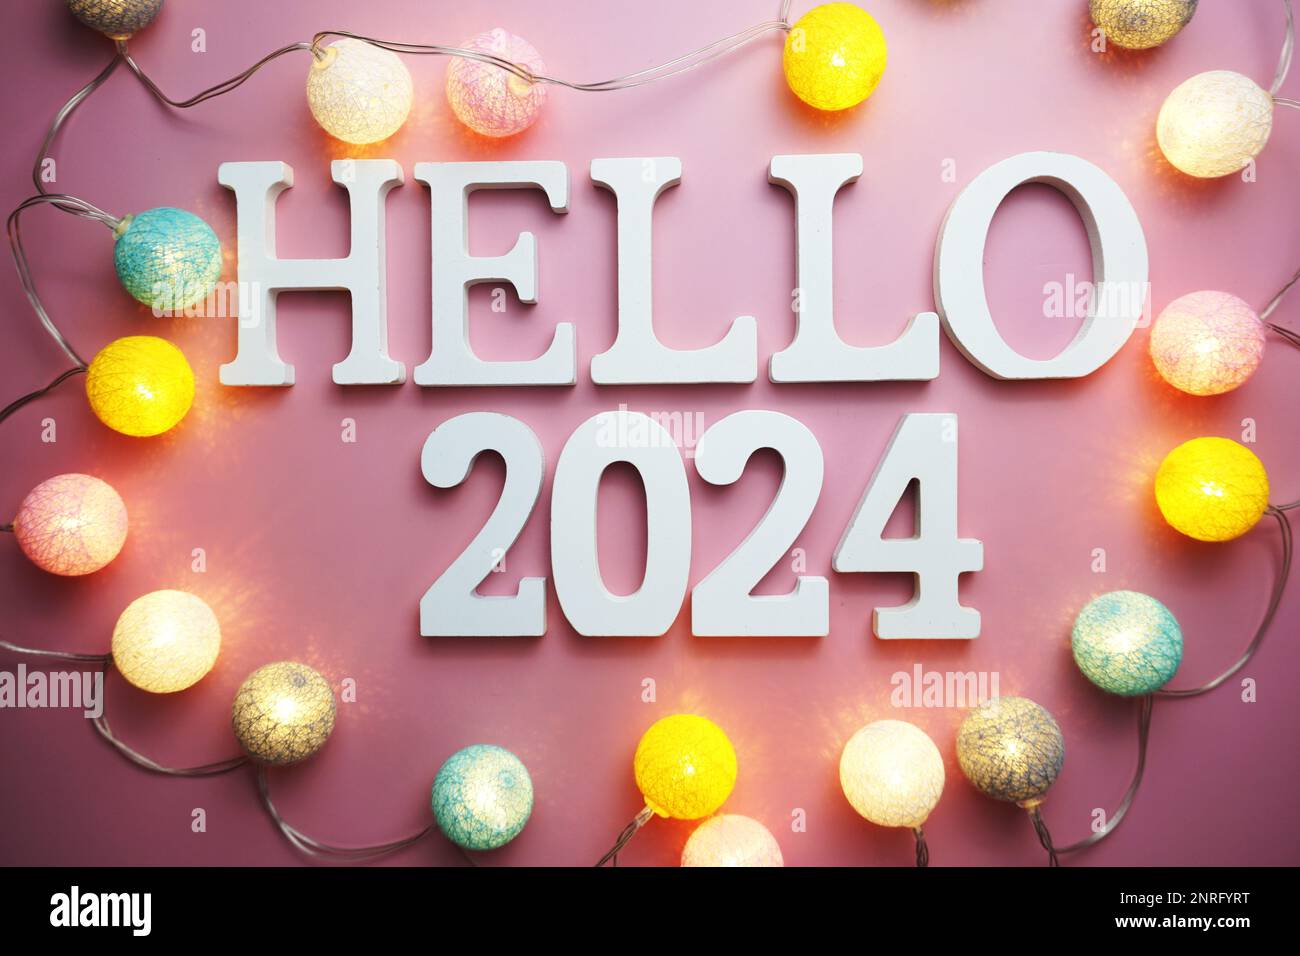 Hello 2024 alphabet letter with cotton ball LED decoration on pink